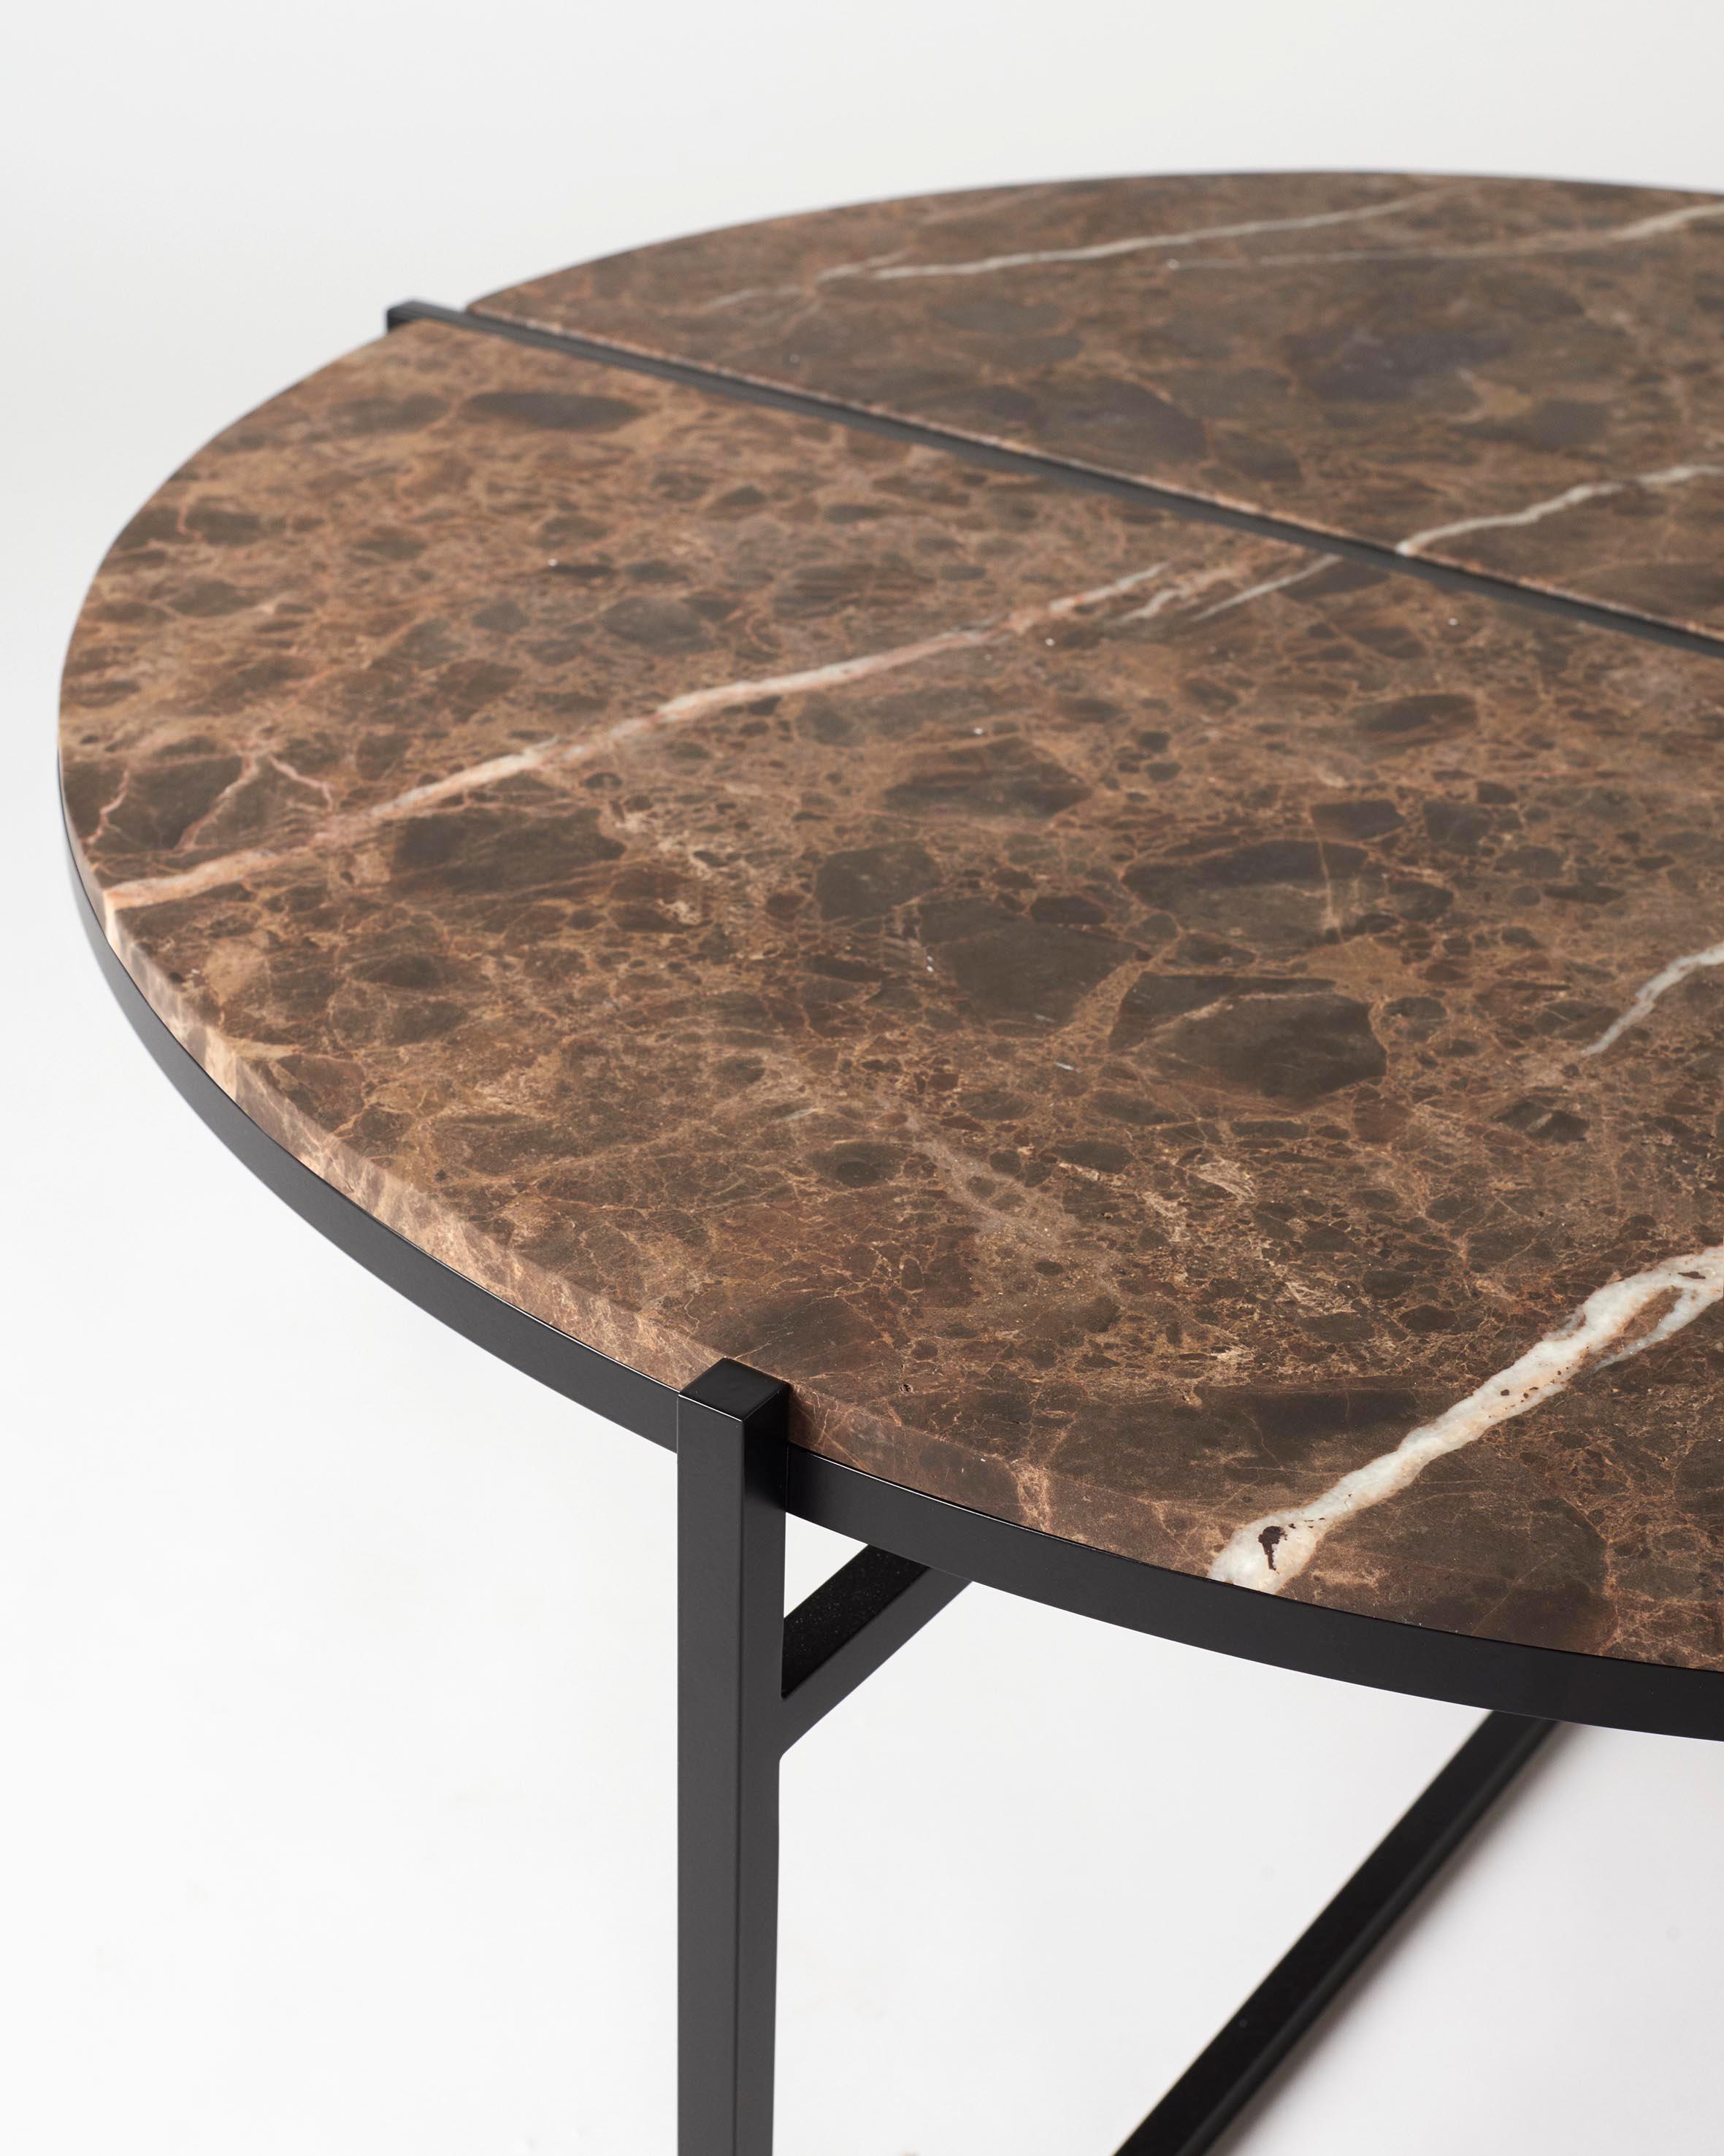 The other way round coffee table creates sophisticated and sculptural aesthetics for any room with its characteristic cut of the top plate, beautiful mirrored frame and clean visual lines.

The mirrored frame creates a shifting effect and separate